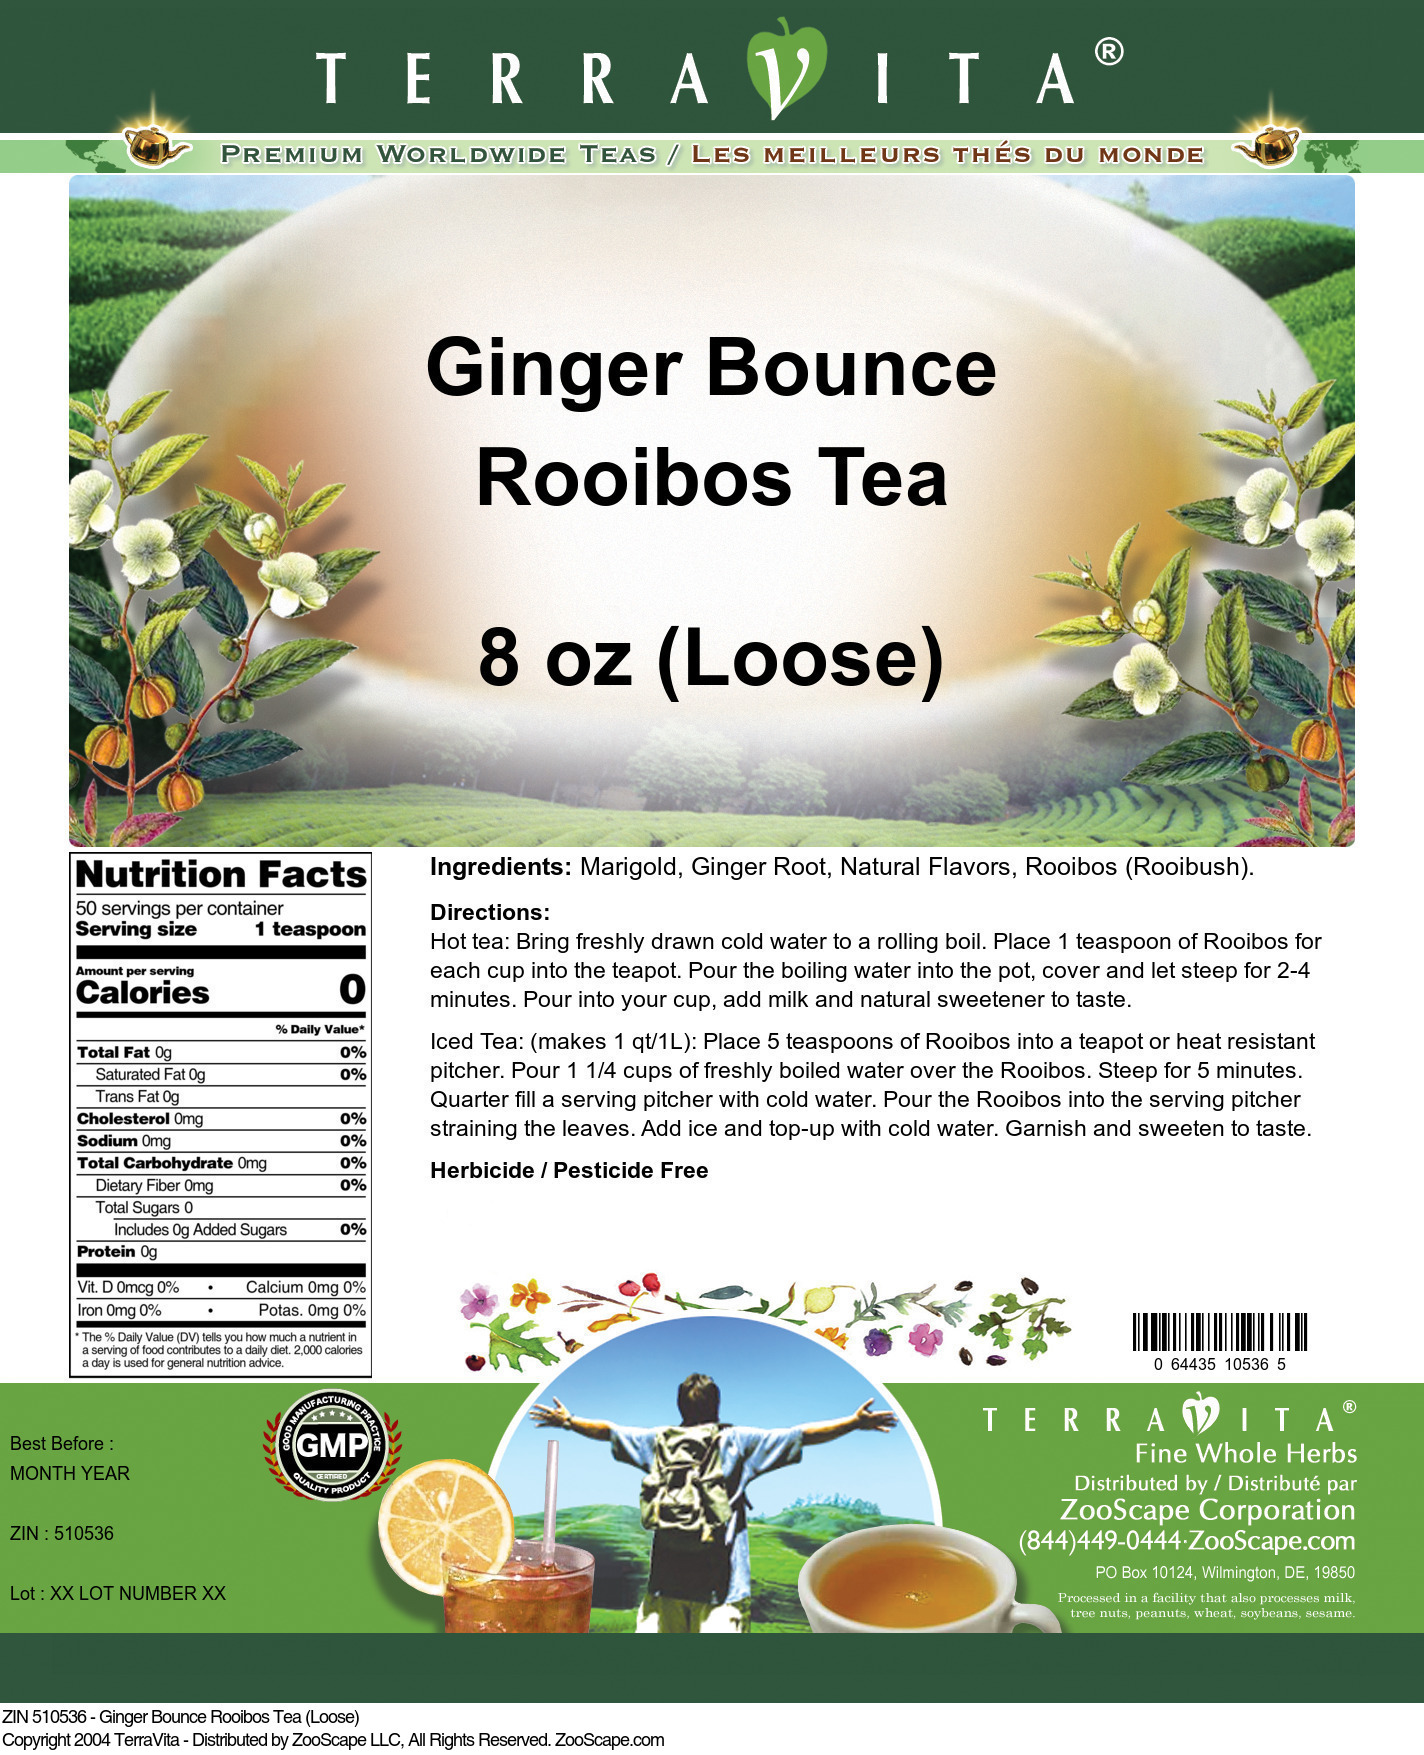 Ginger Bounce Rooibos Tea (Loose) - Label